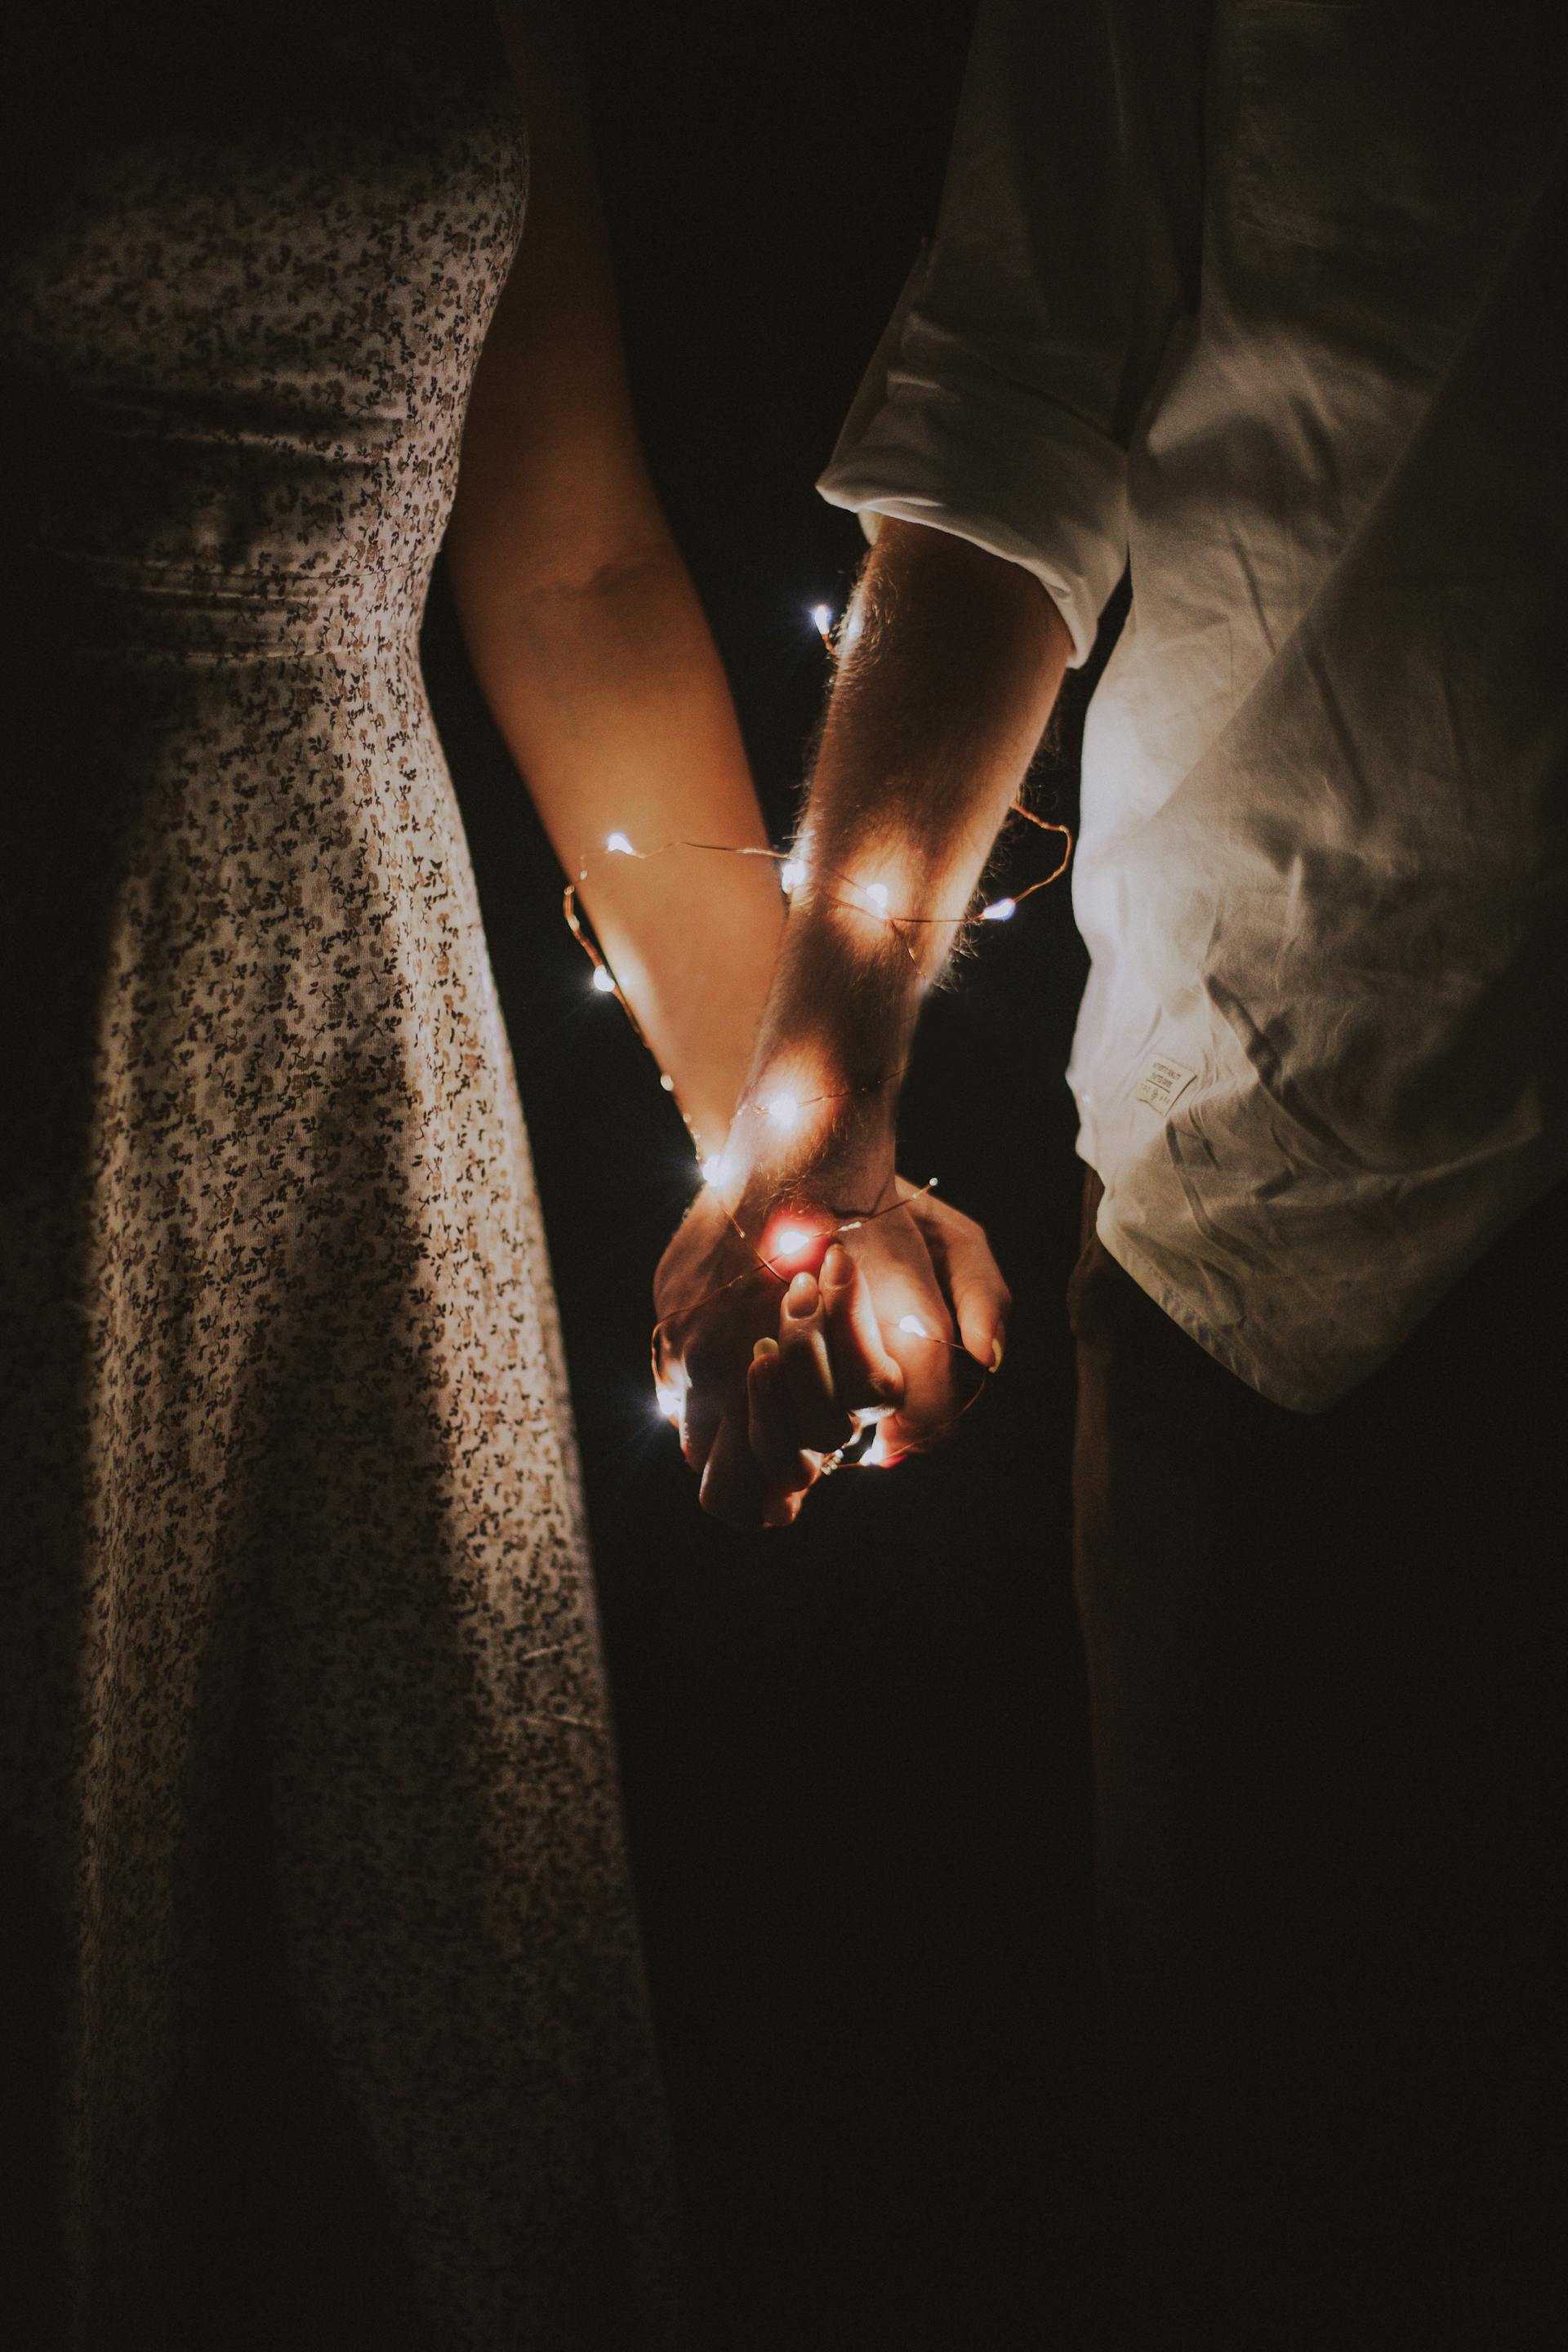 A couple holding each other's hands wrapped with string lights | Source: Pexels